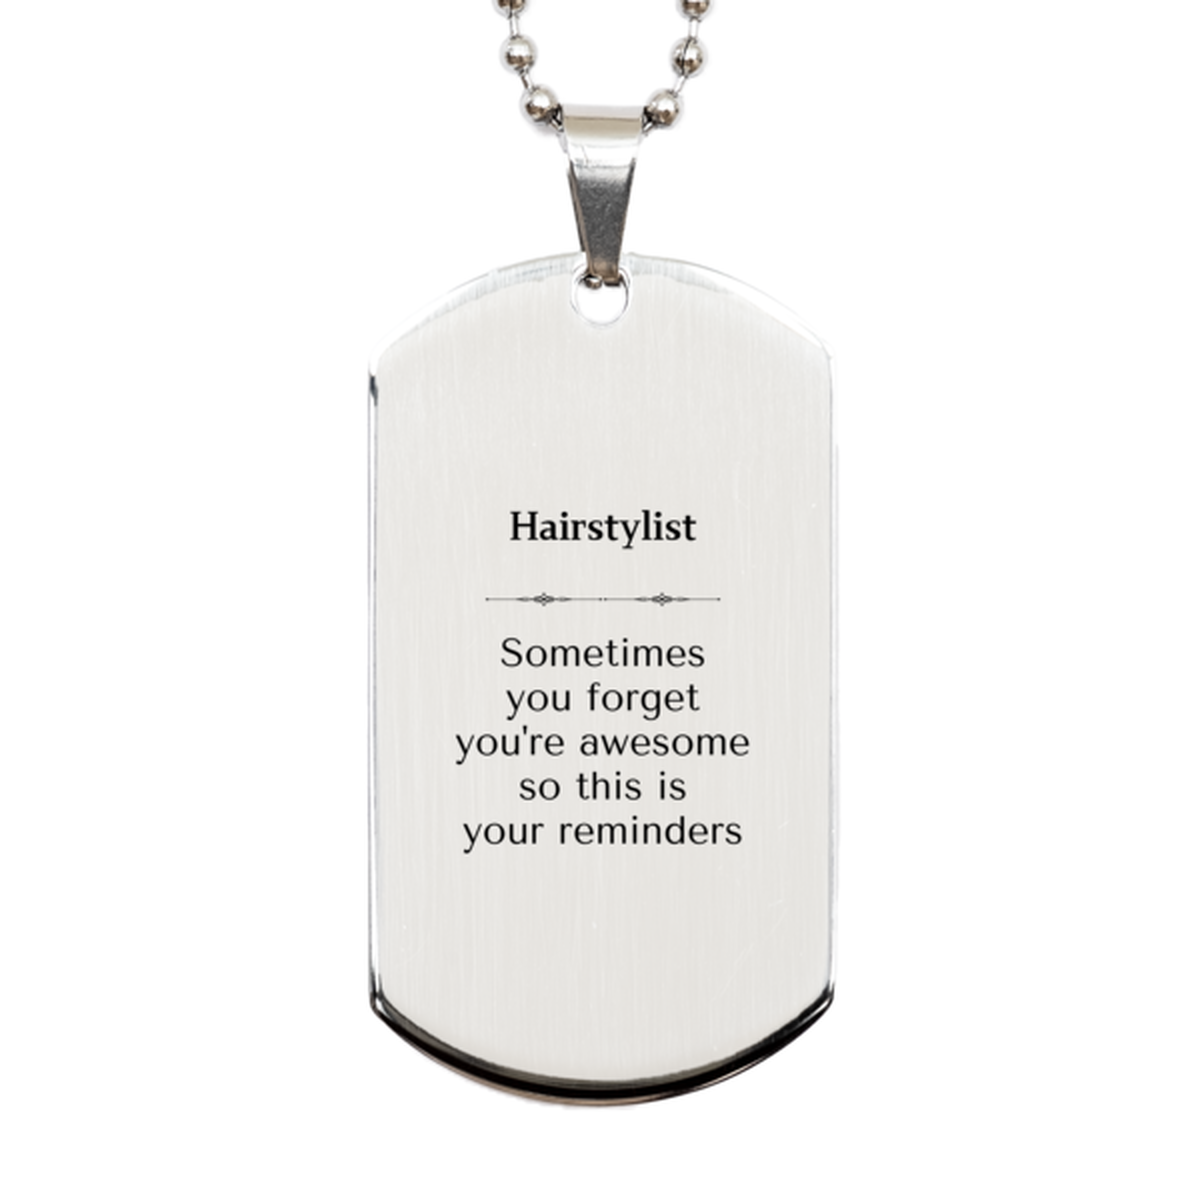 Sentimental Hairstylist Silver Dog Tag, Hairstylist Sometimes you forget you're awesome so this is your reminders, Graduation Christmas Birthday Gifts for Hairstylist, Men, Women, Coworkers